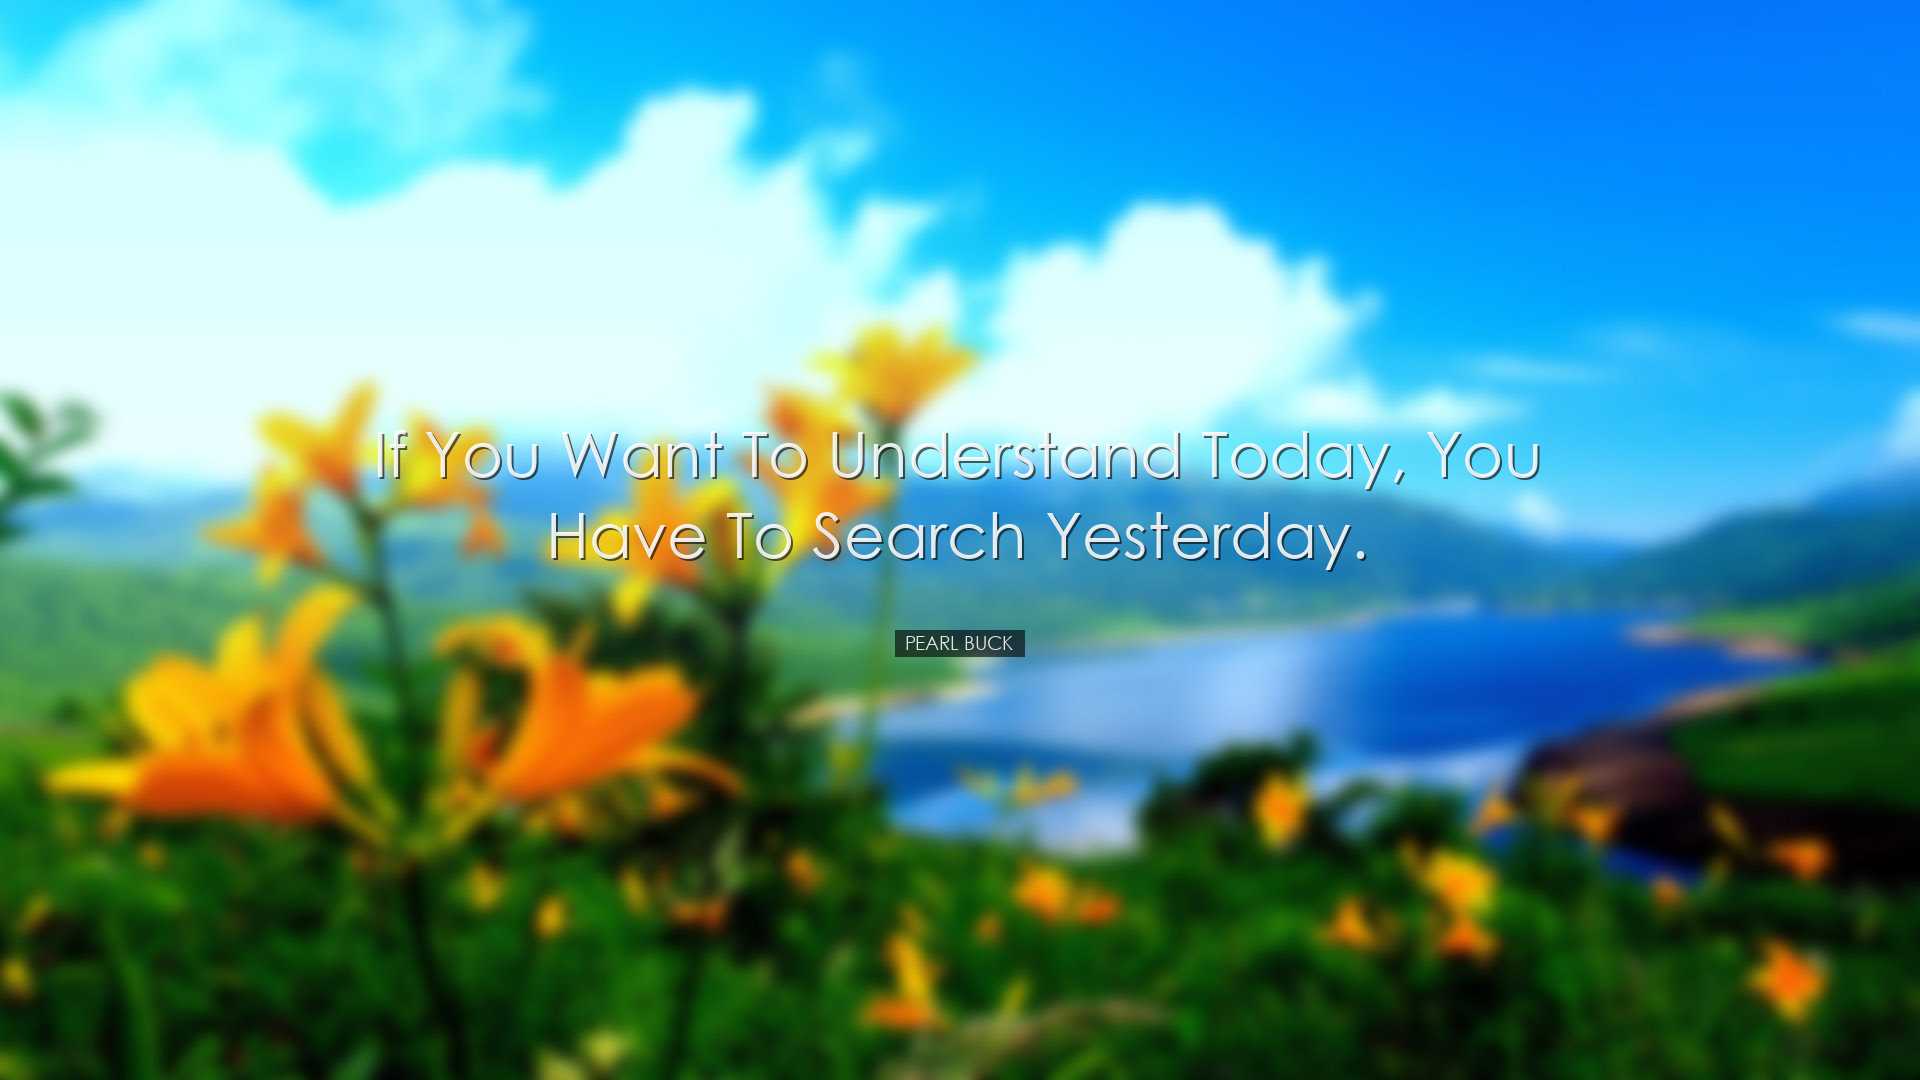 If you want to understand today, you have to search yesterday. - P